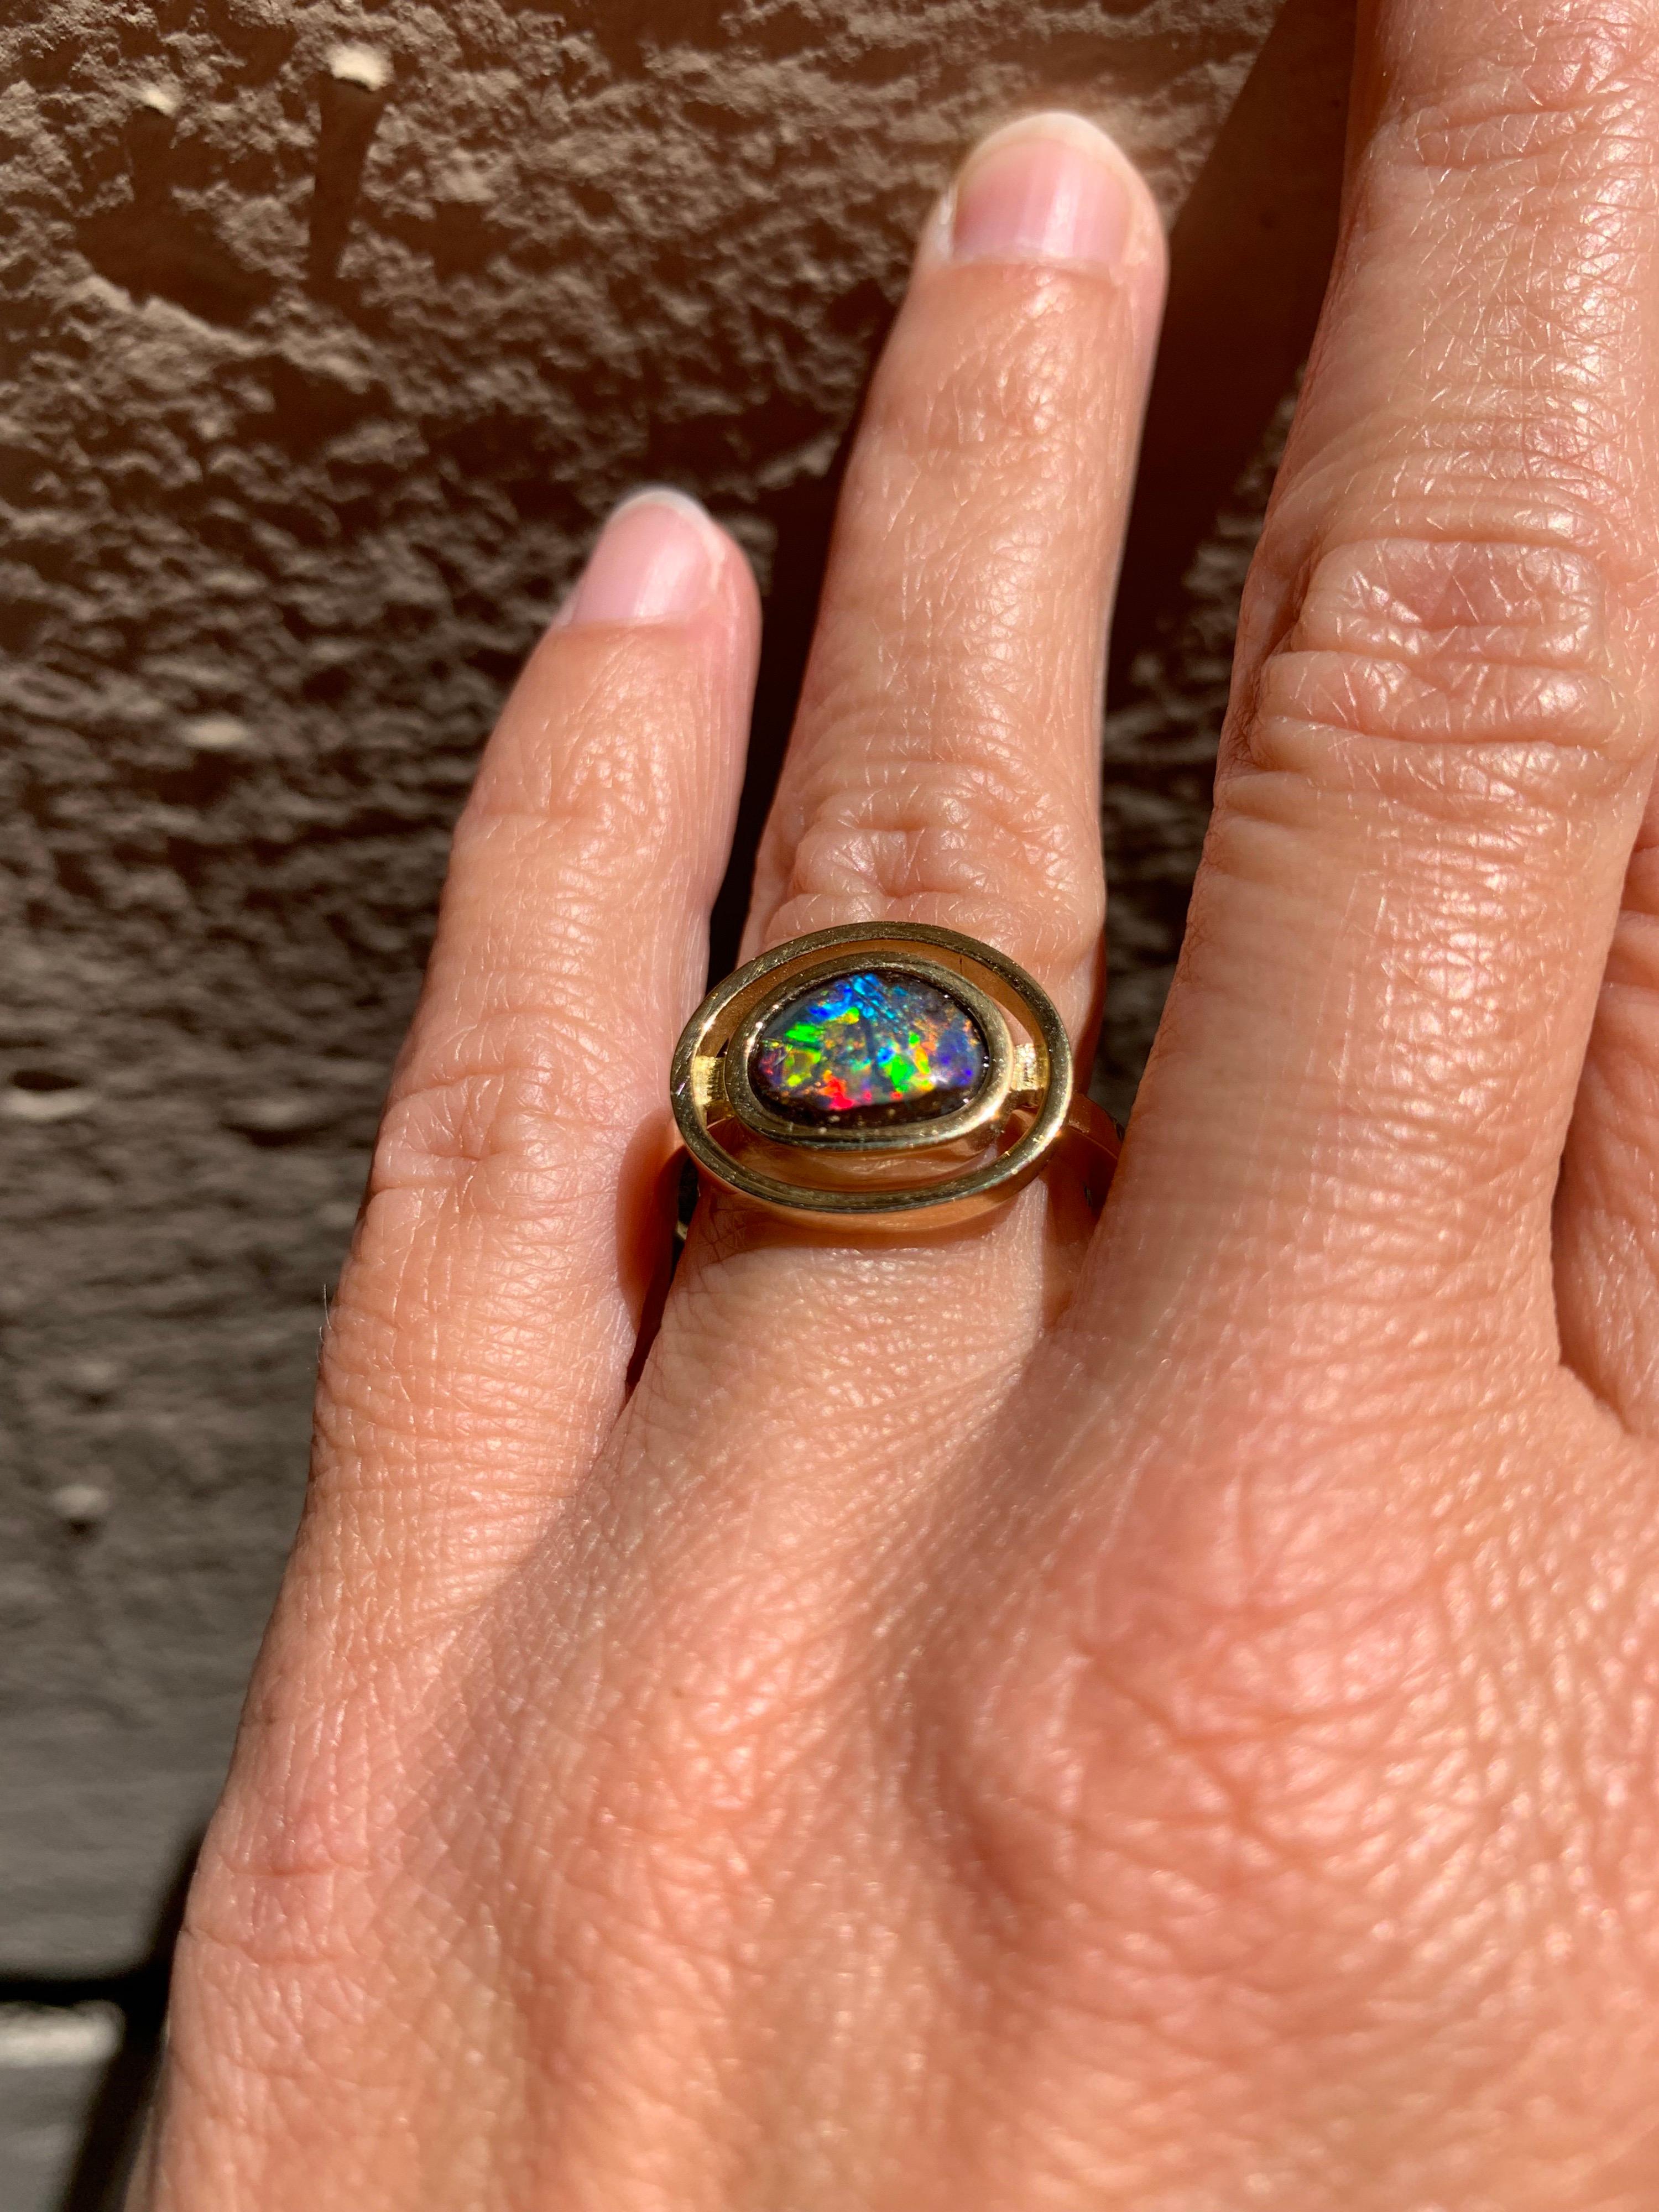 This cocktail ring is handmade in 18k yellow gold with a top-quality Australian black opal.
This top-quality black opal has a magnificient combination of blue, pink, orange , purple and green hues.
It is a unique piece and it has been designed and